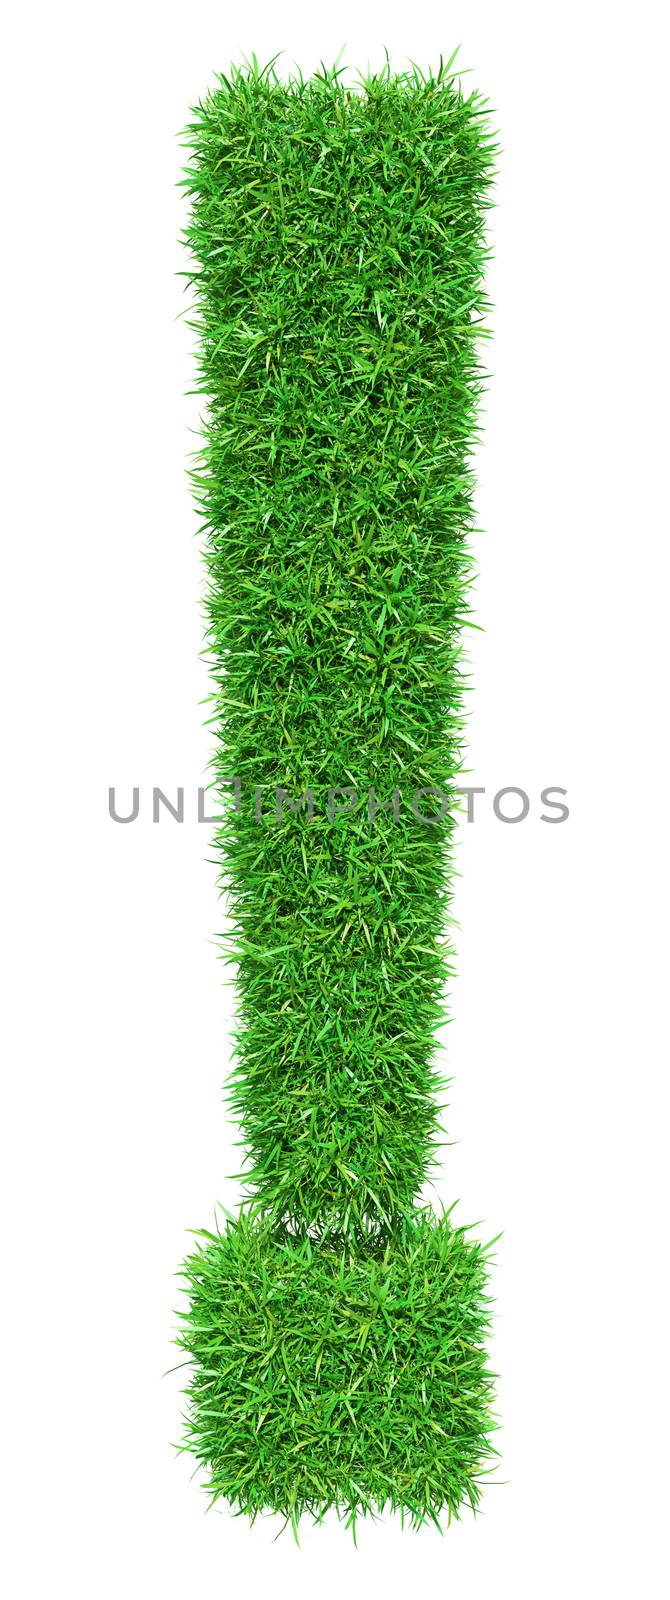 Green grass exclamation point, isolated on white background. 3D illustration